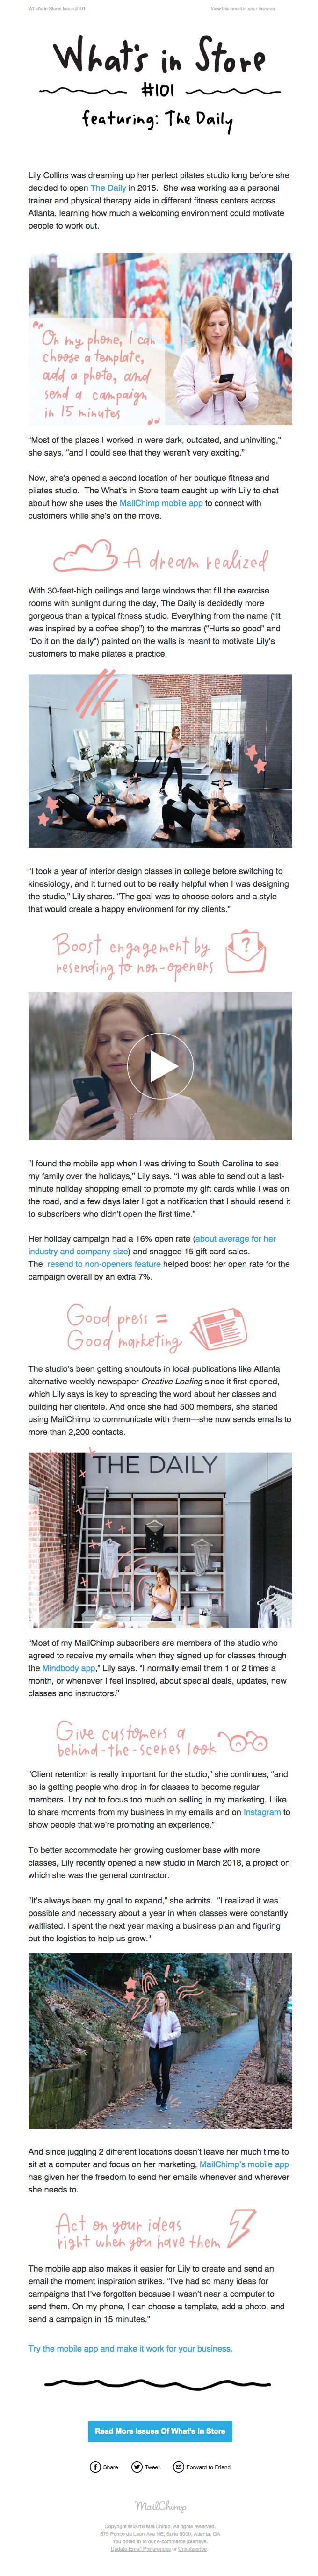 How The Daily makes the most of the MailChimp mobile app - MailChimp Email Newsletter